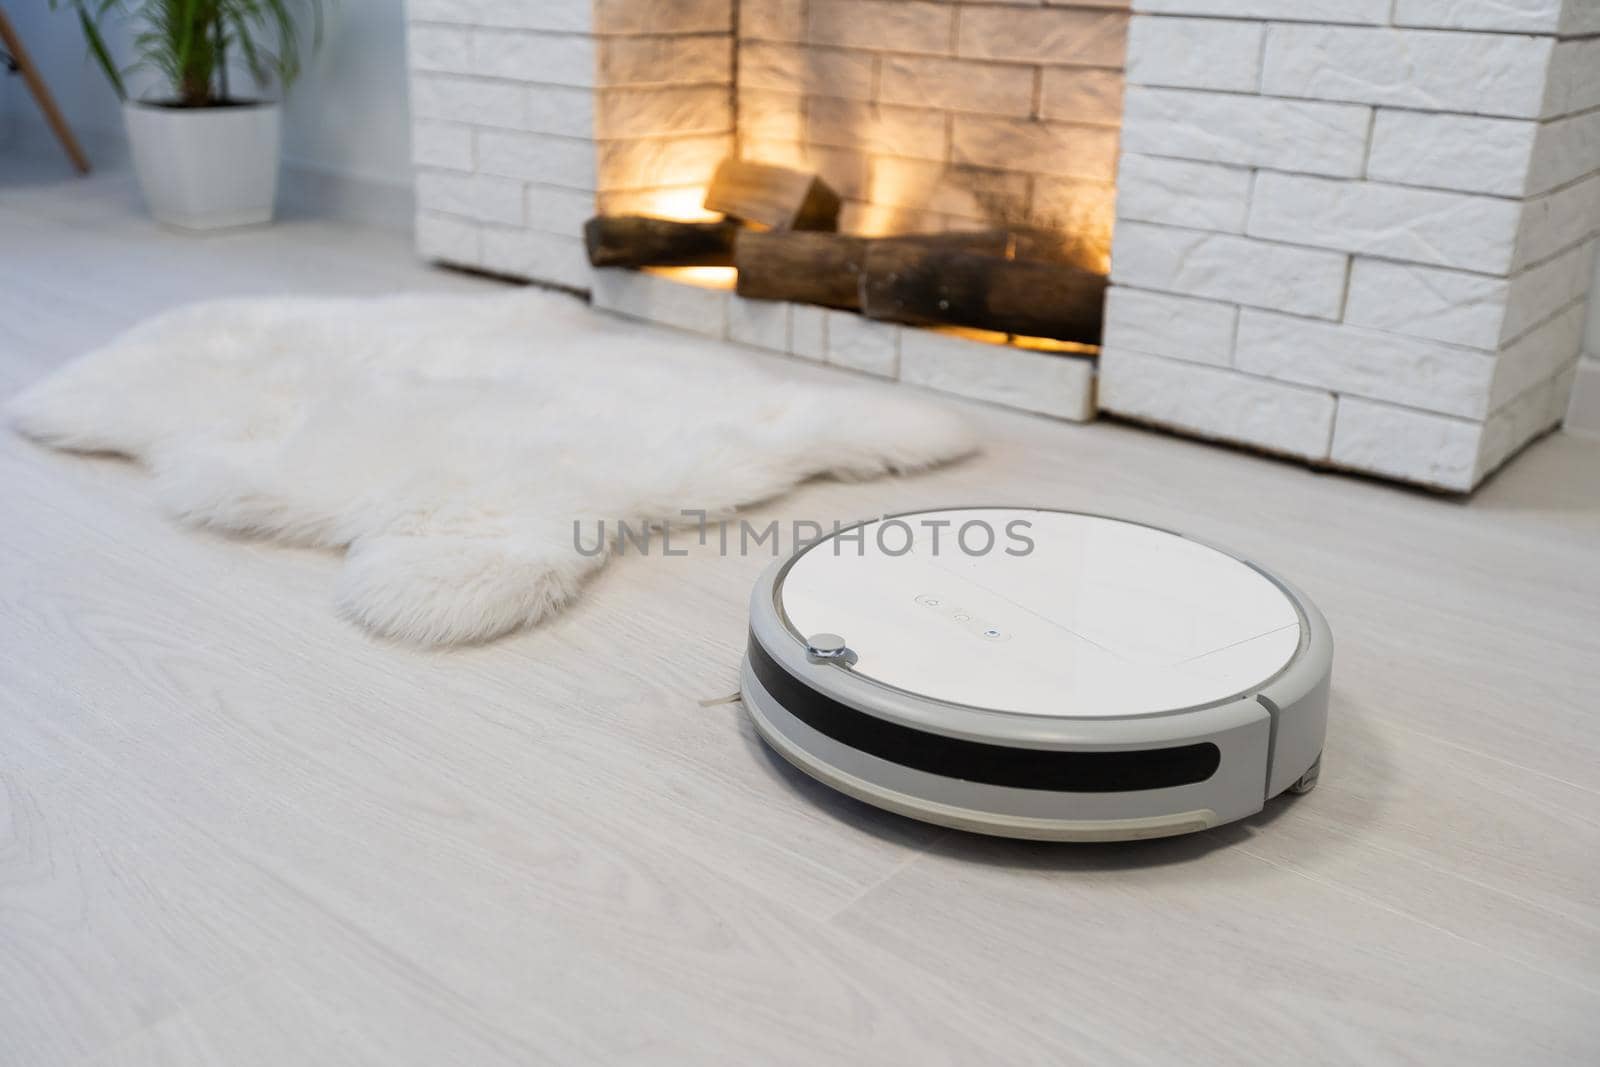 robotic vacuum cleaner on laminate wood floor smart cleaning technology.